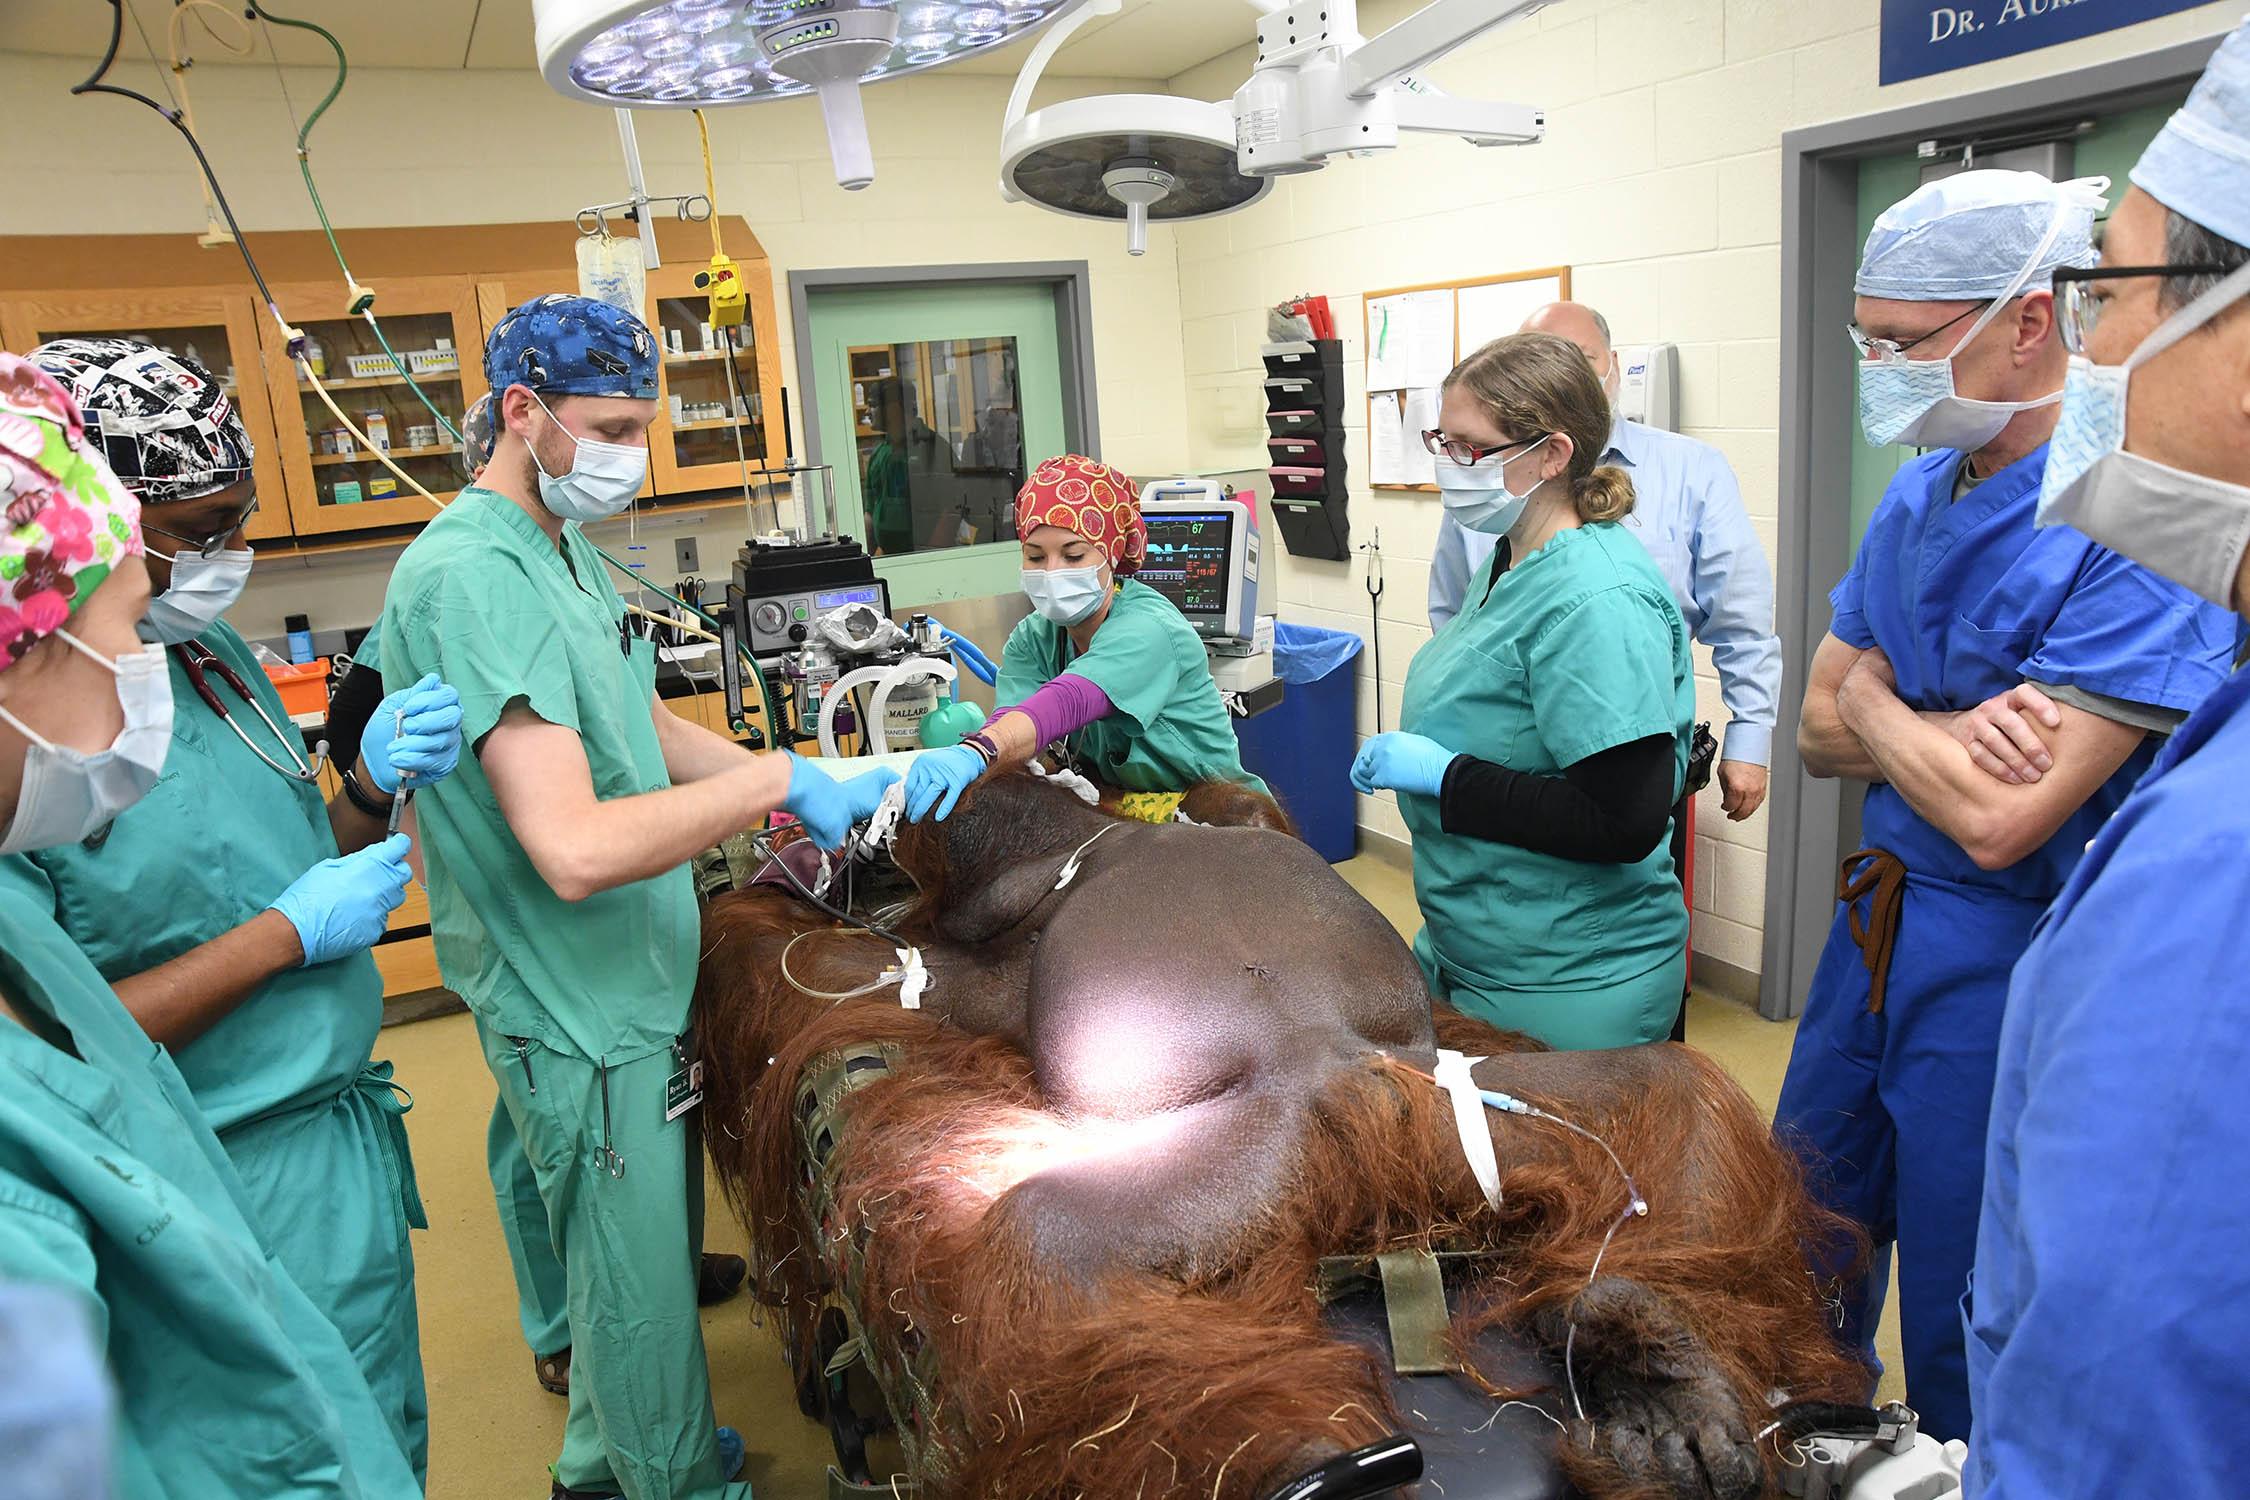 On Jan. 23, Chicago Zoological Society’s veterinary staff performed an emergency appendectomy on Ben, a 40-year-old orangutan at the zoo. The staff were assisted by general surgeons Eric Yang and William Frymark from Amita Health Hinsdale and La Grange. (Jim Schulz / Chicago Zoological Society)